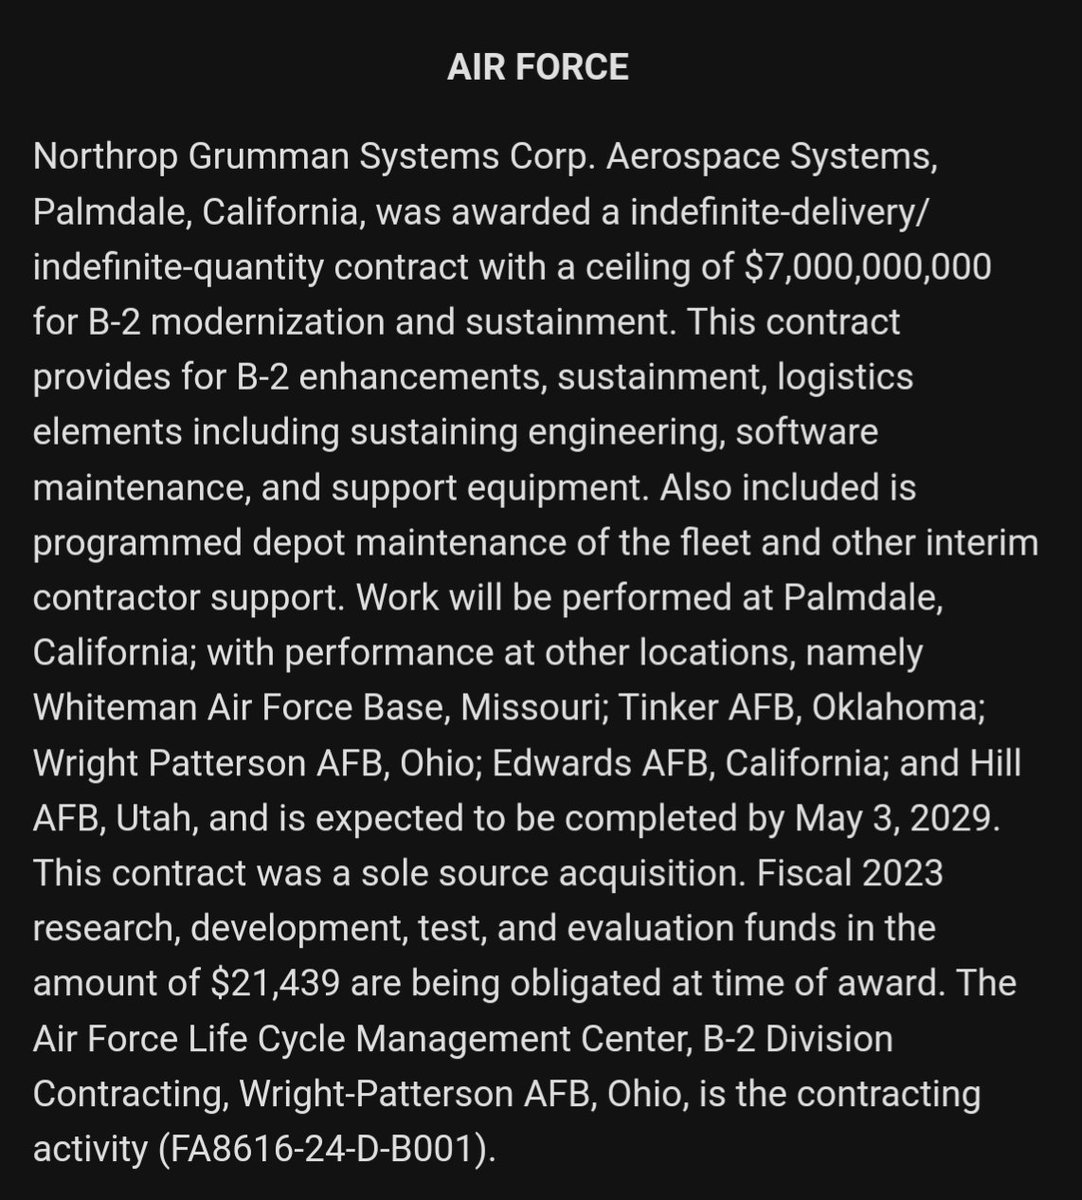 ❗🇺🇲 The Department of Defense has awarded Northrop Grumman a $7 billion contract for B-2 Spirit modernization and sustainment. The US Air Force plans to continue operating them until at least 2032, when they will be replaced by Northrop's new B-21 Raider.